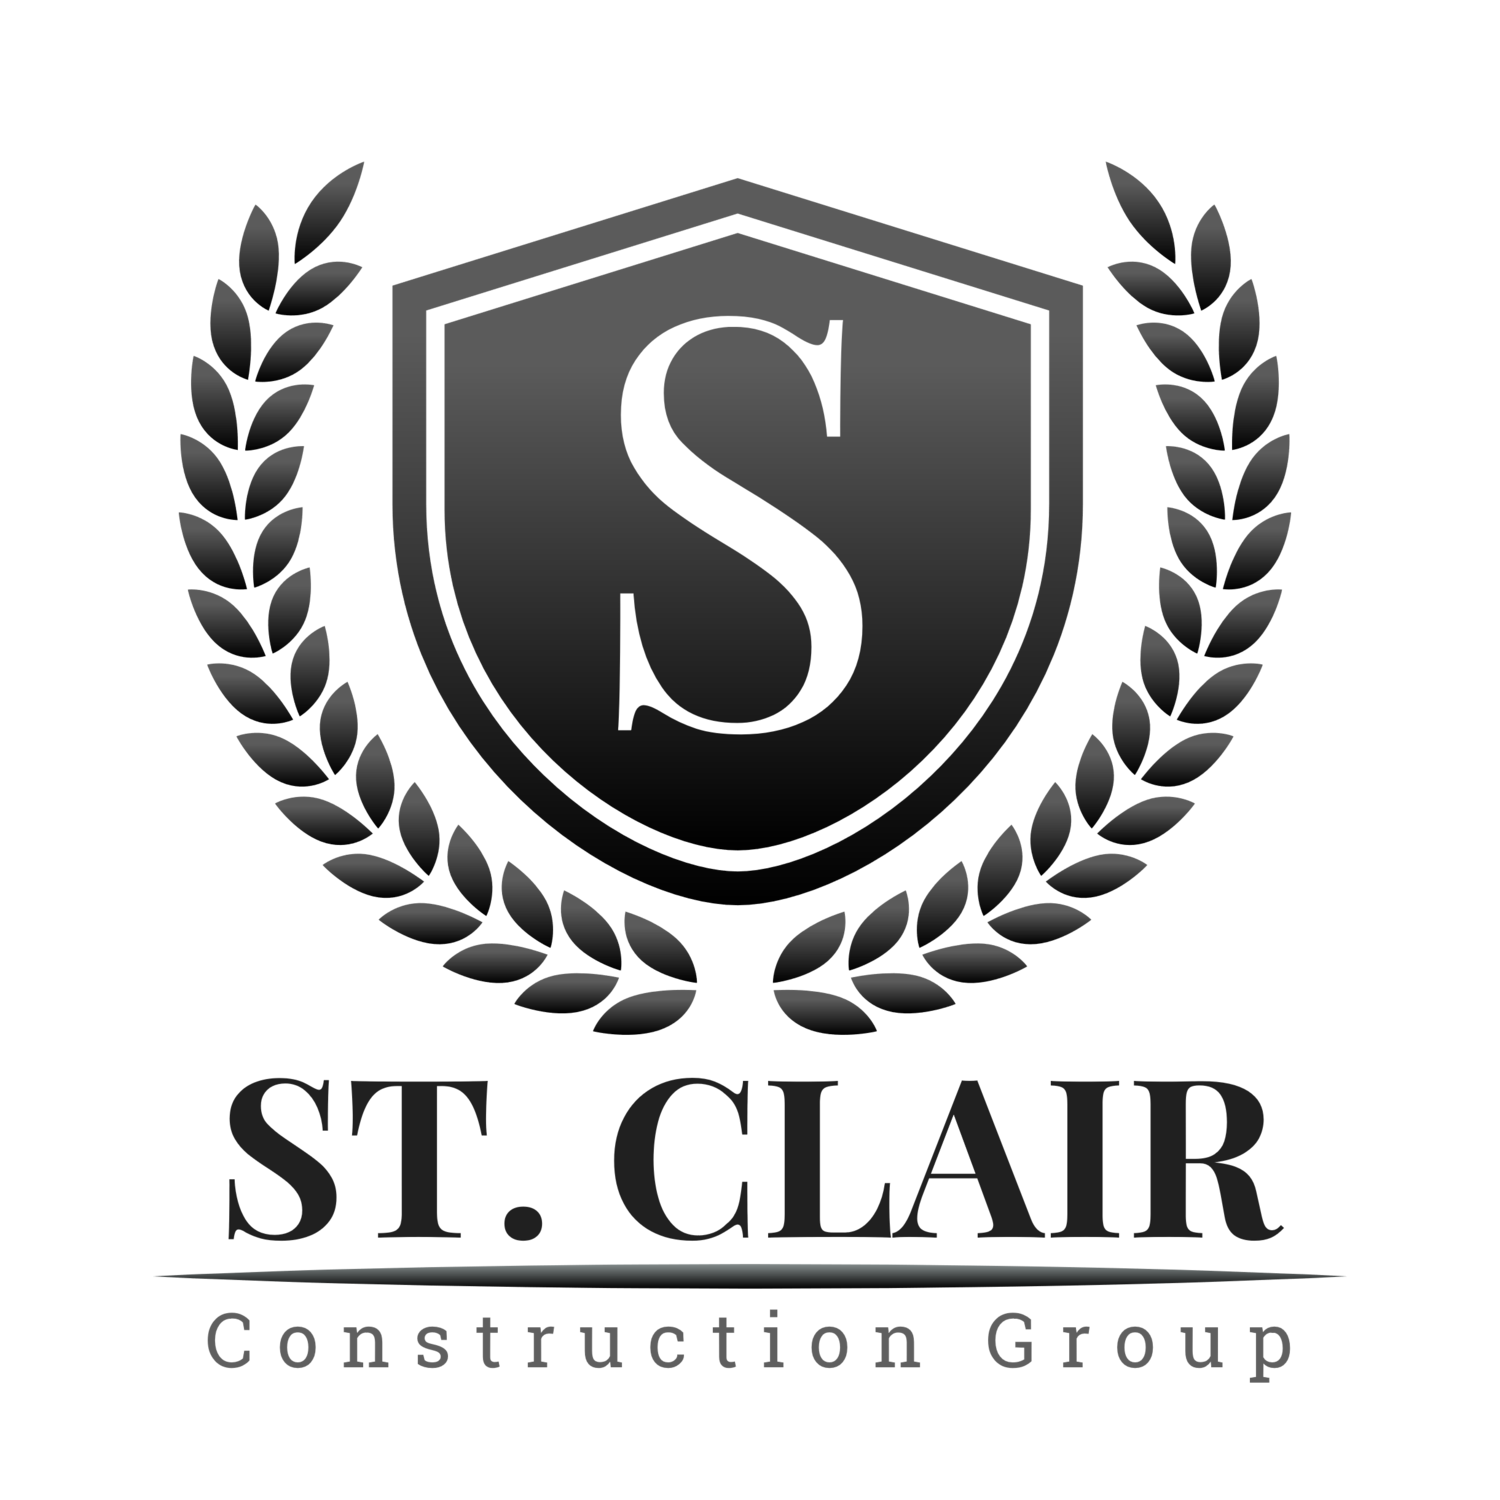 St. Clair Construction Group